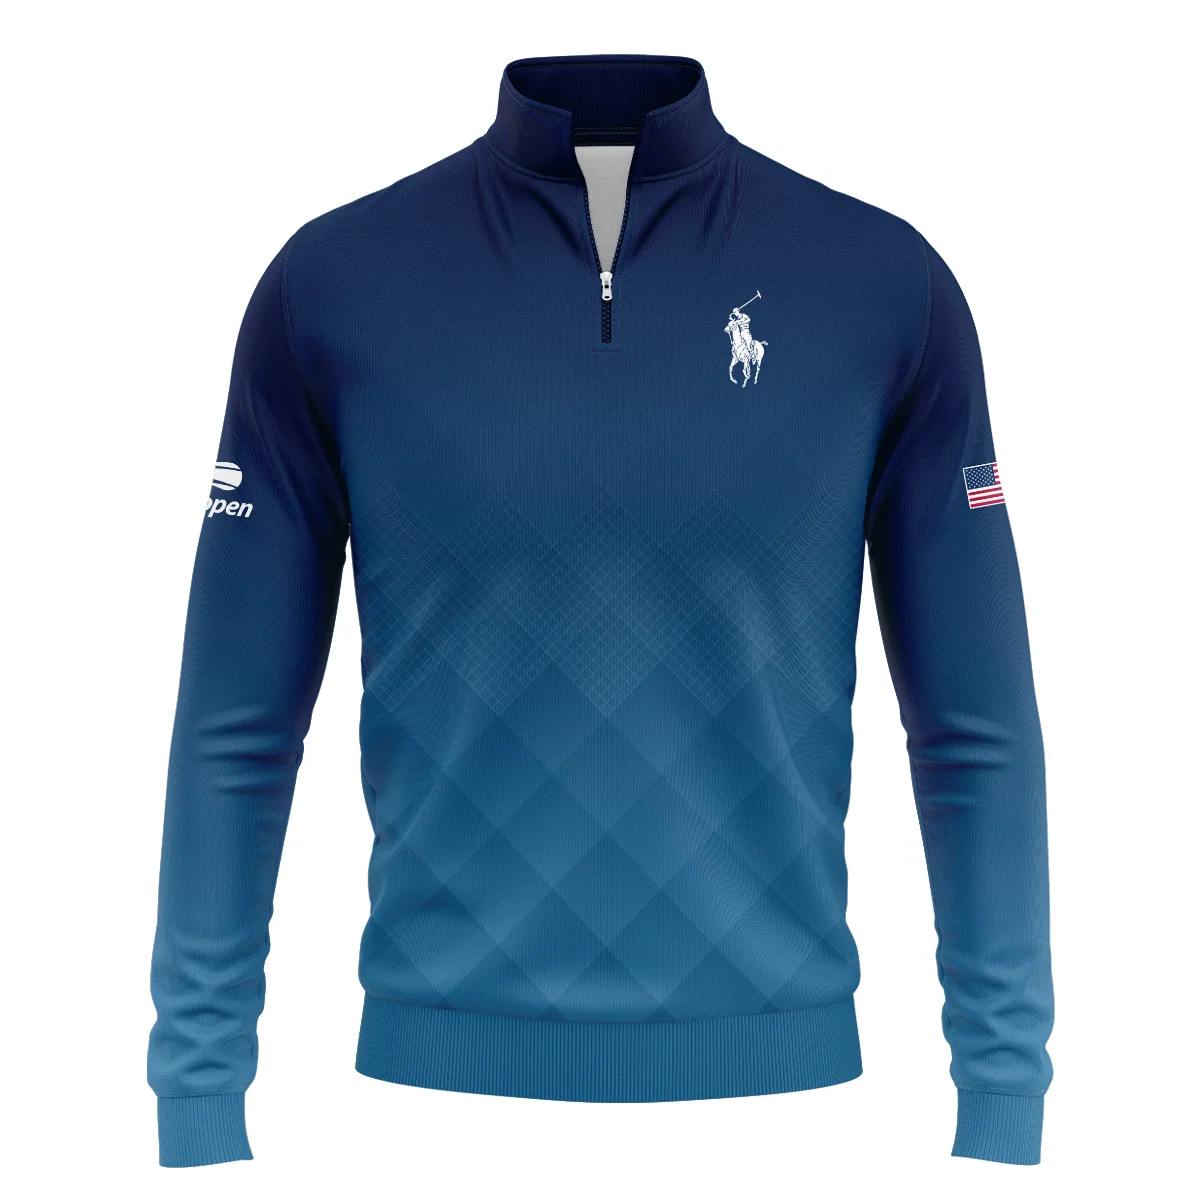 Ralph Lauren Blue Abstract Background US Open Tennis Champions Vneck Polo Shirt Style Classic Polo Shirt For Men